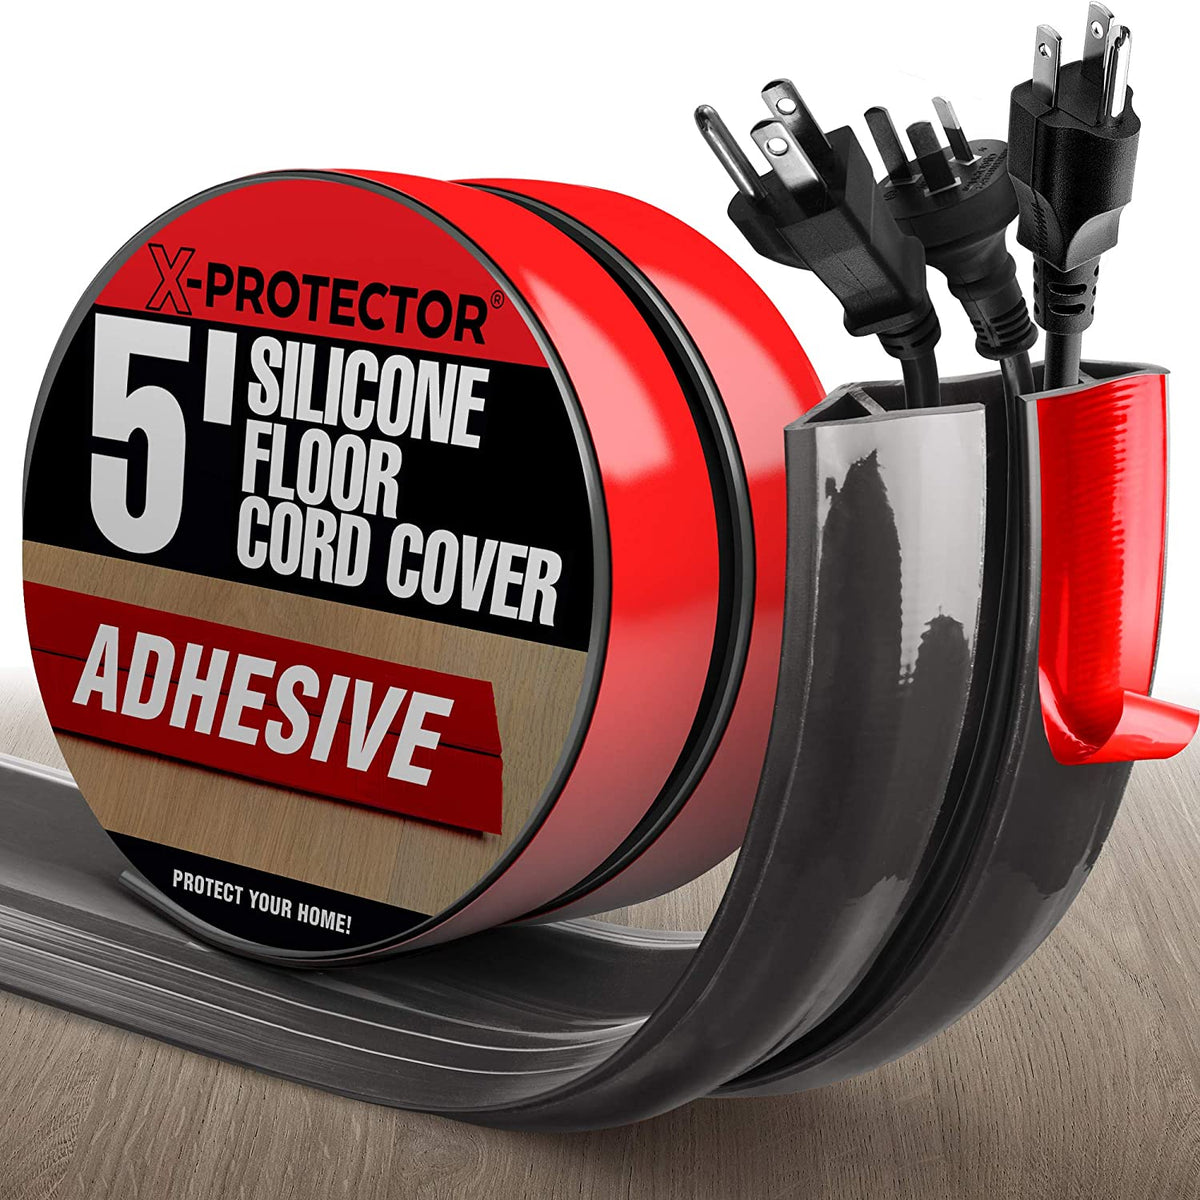 Black Floor Cord Cover with Adhesive Tape for Any Flooring Surface  Overfloor Cord Protector Cable Grip Strip Management Hold Cords in Place  for Power